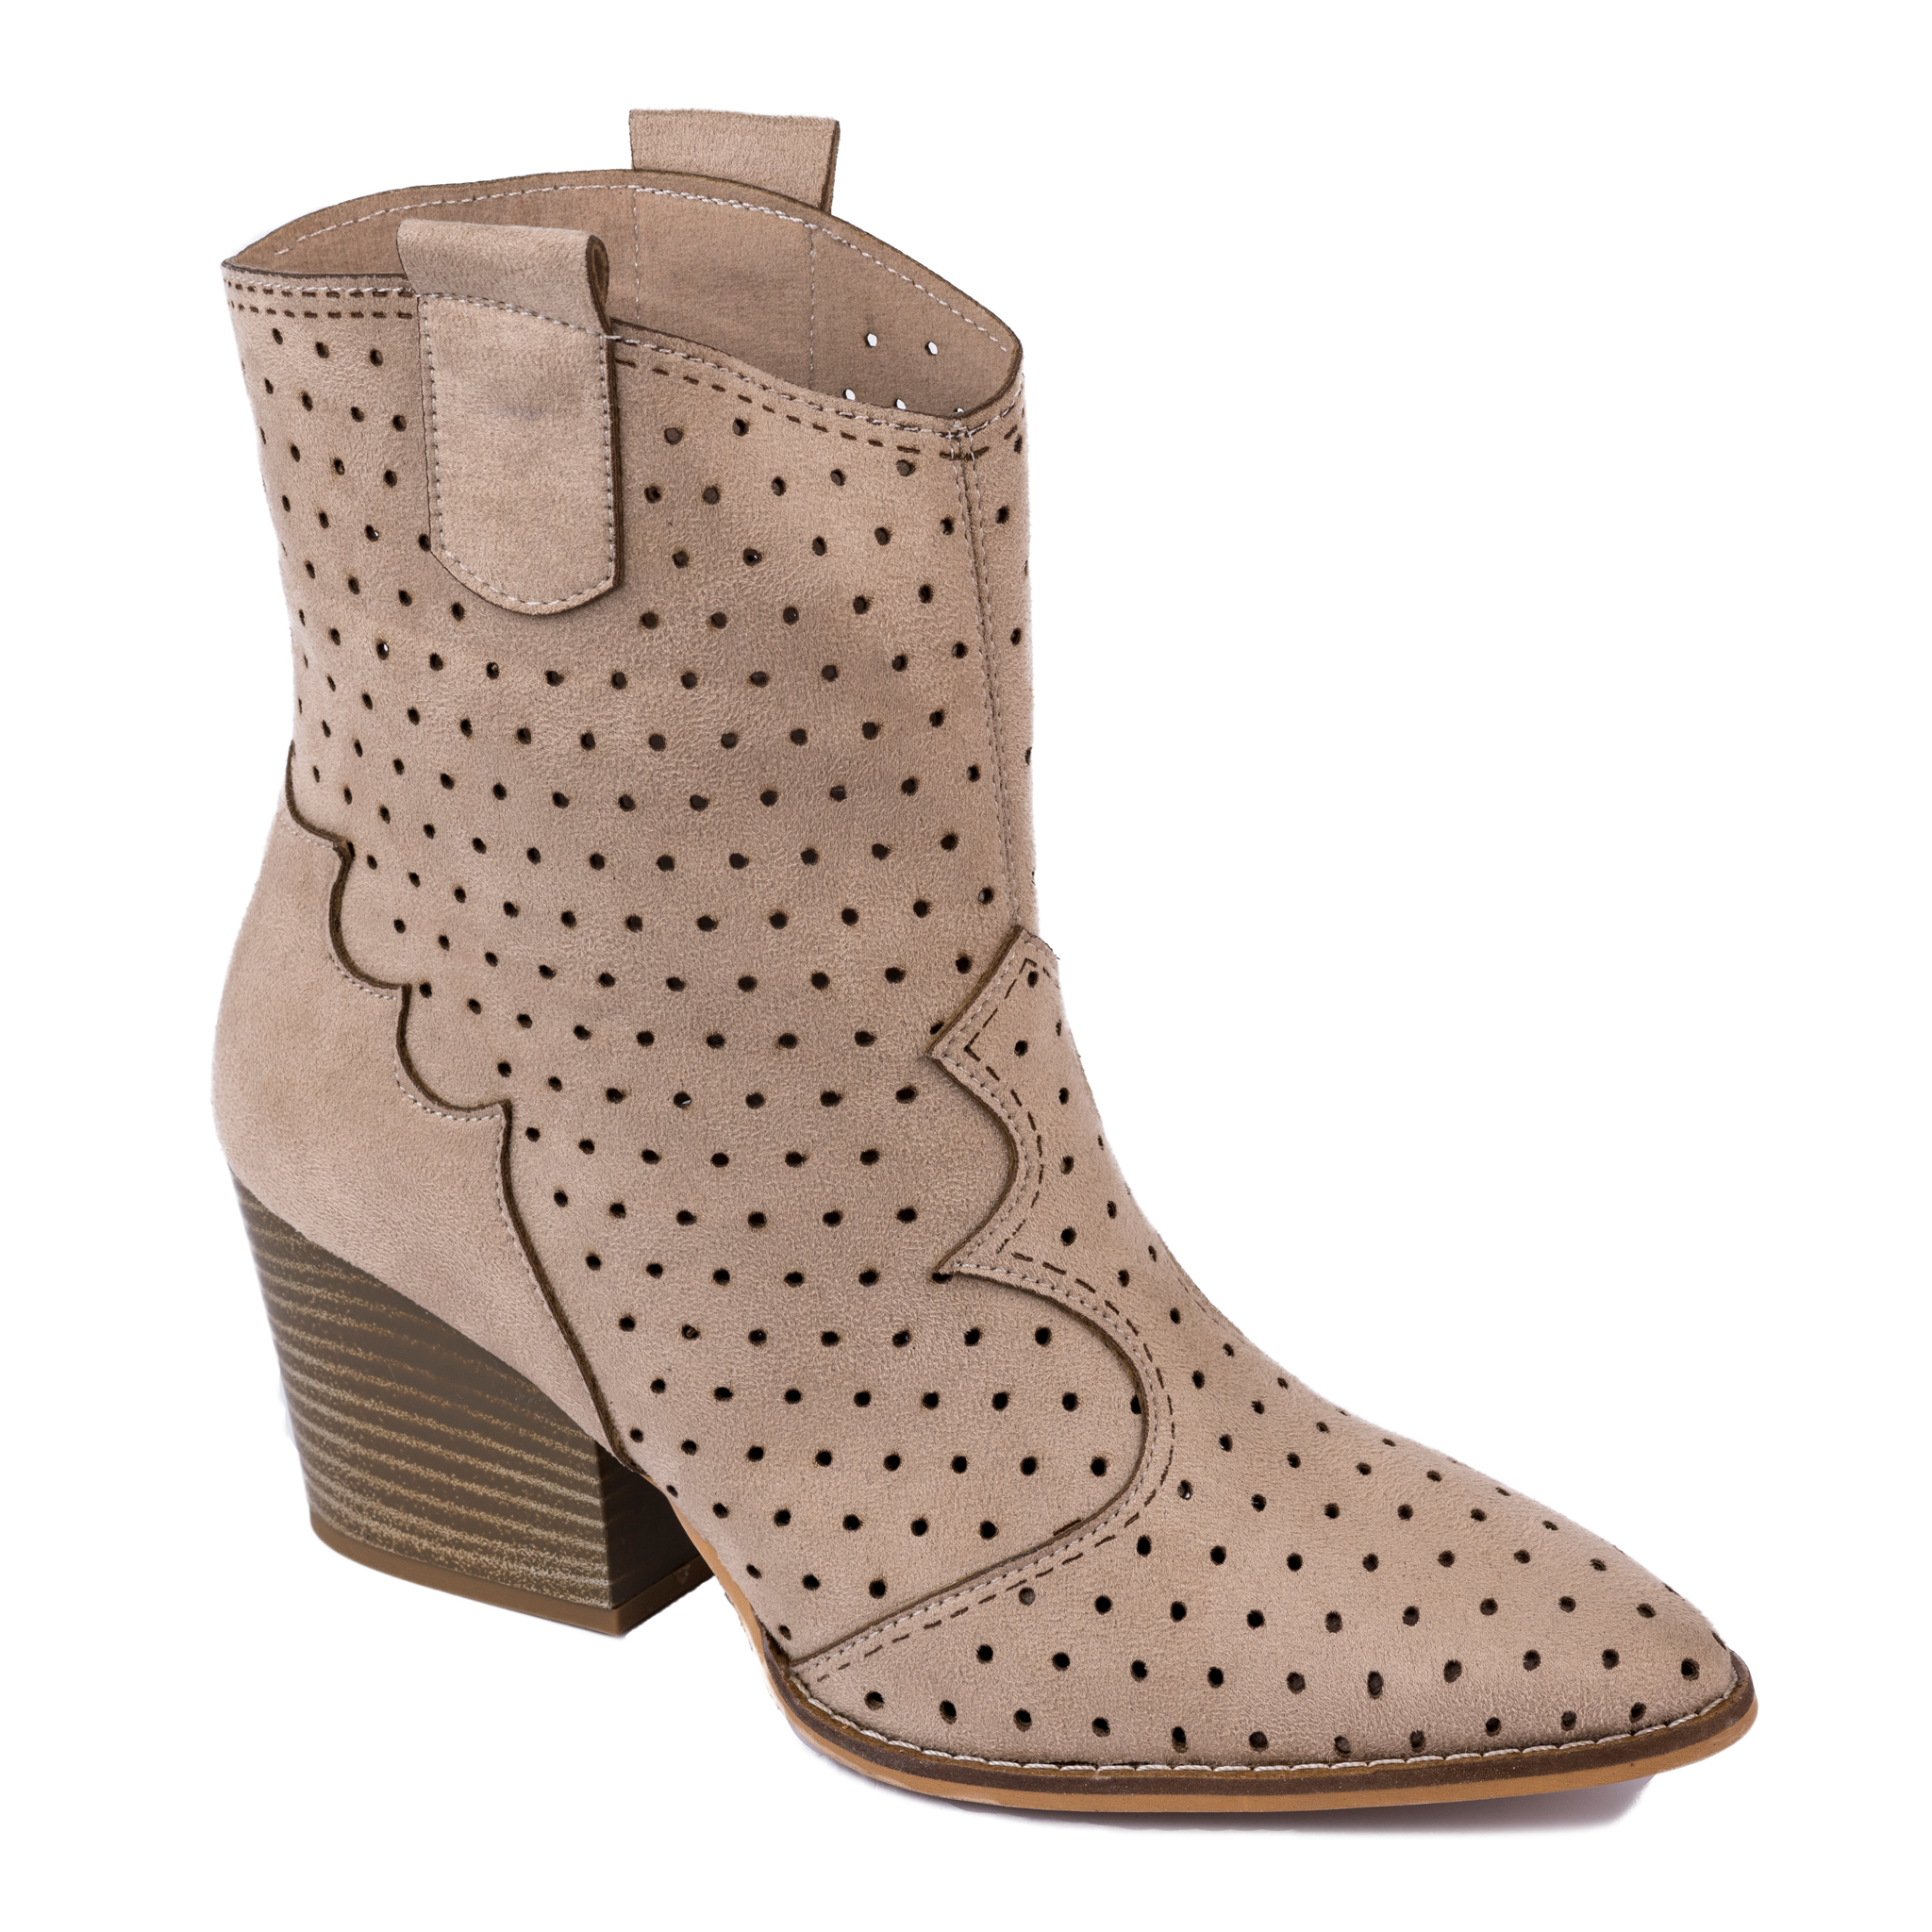 HOLLOW COWGIRL ANKLE BOOTS WITH THICK HEEL - BEIGE